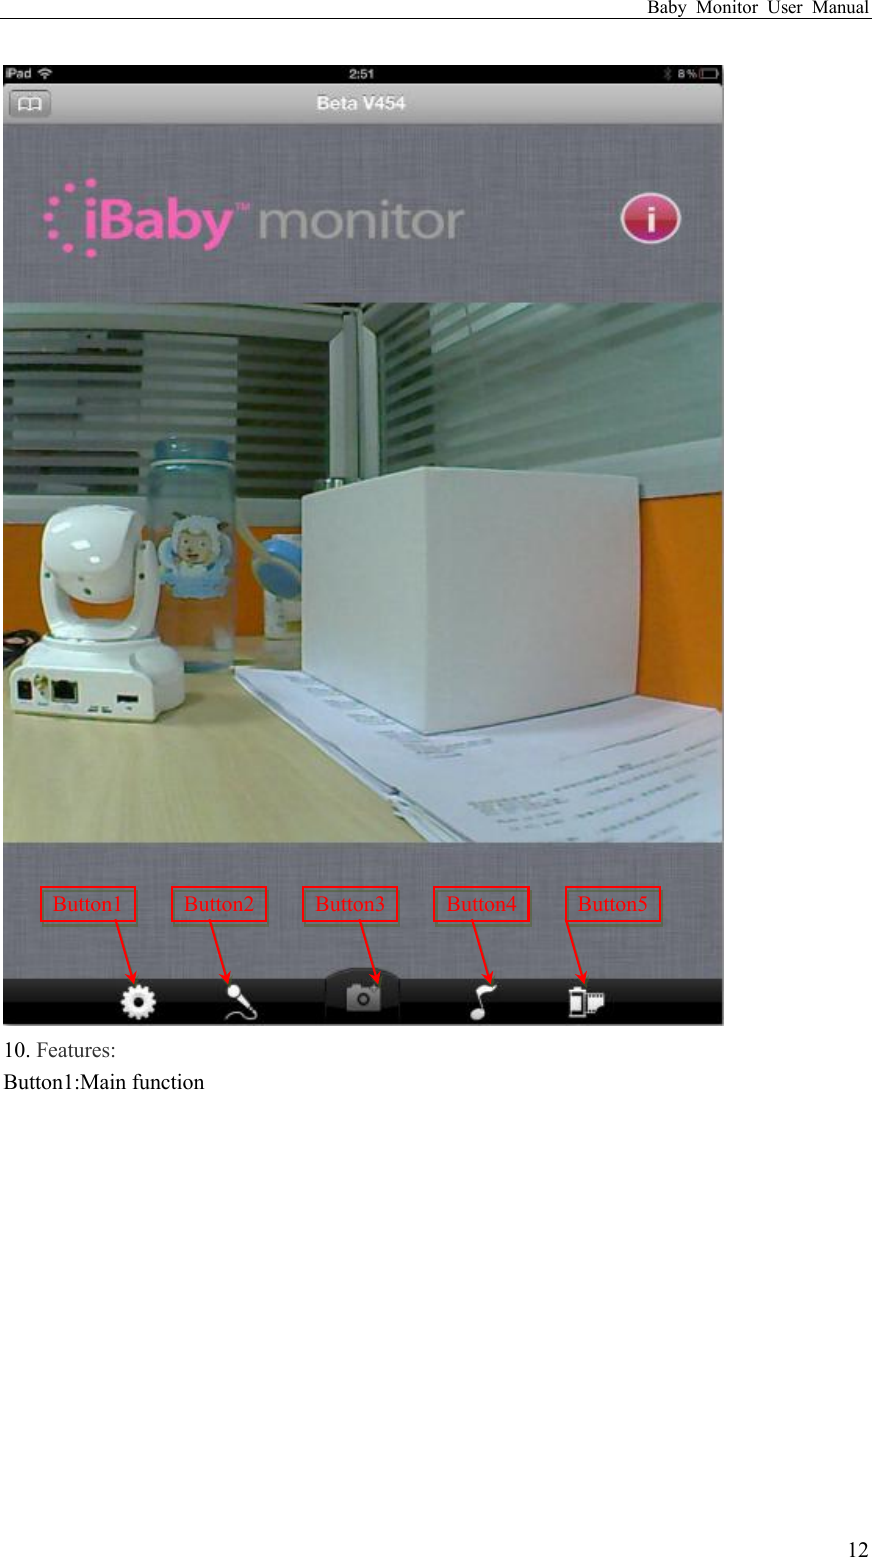 Baby  Monitor  User  Manual  12  10. Features: Button1:Main function Button1 Button2 Button3 Button4 Button5 